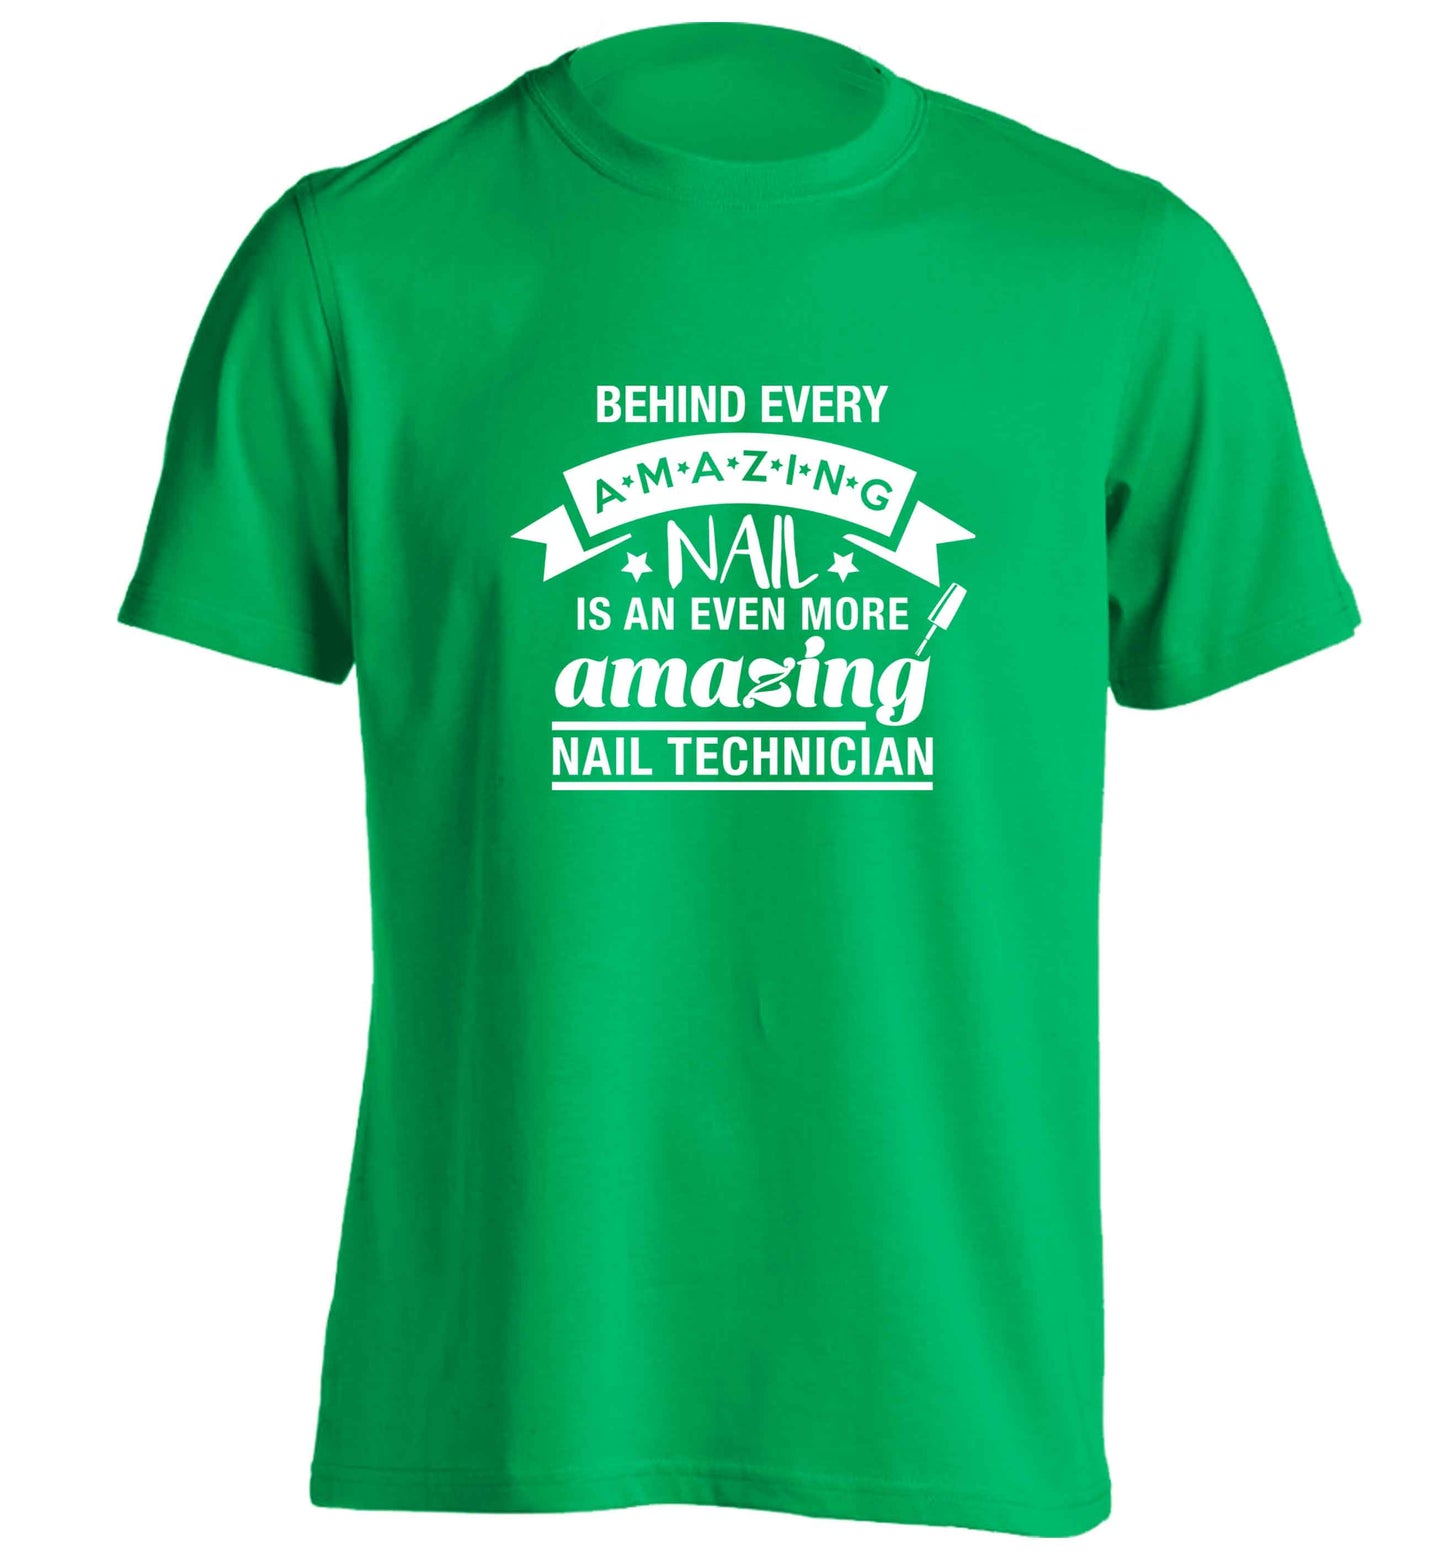 Behind every amazing nail is an even more amazing nail technician adults unisex green Tshirt 2XL